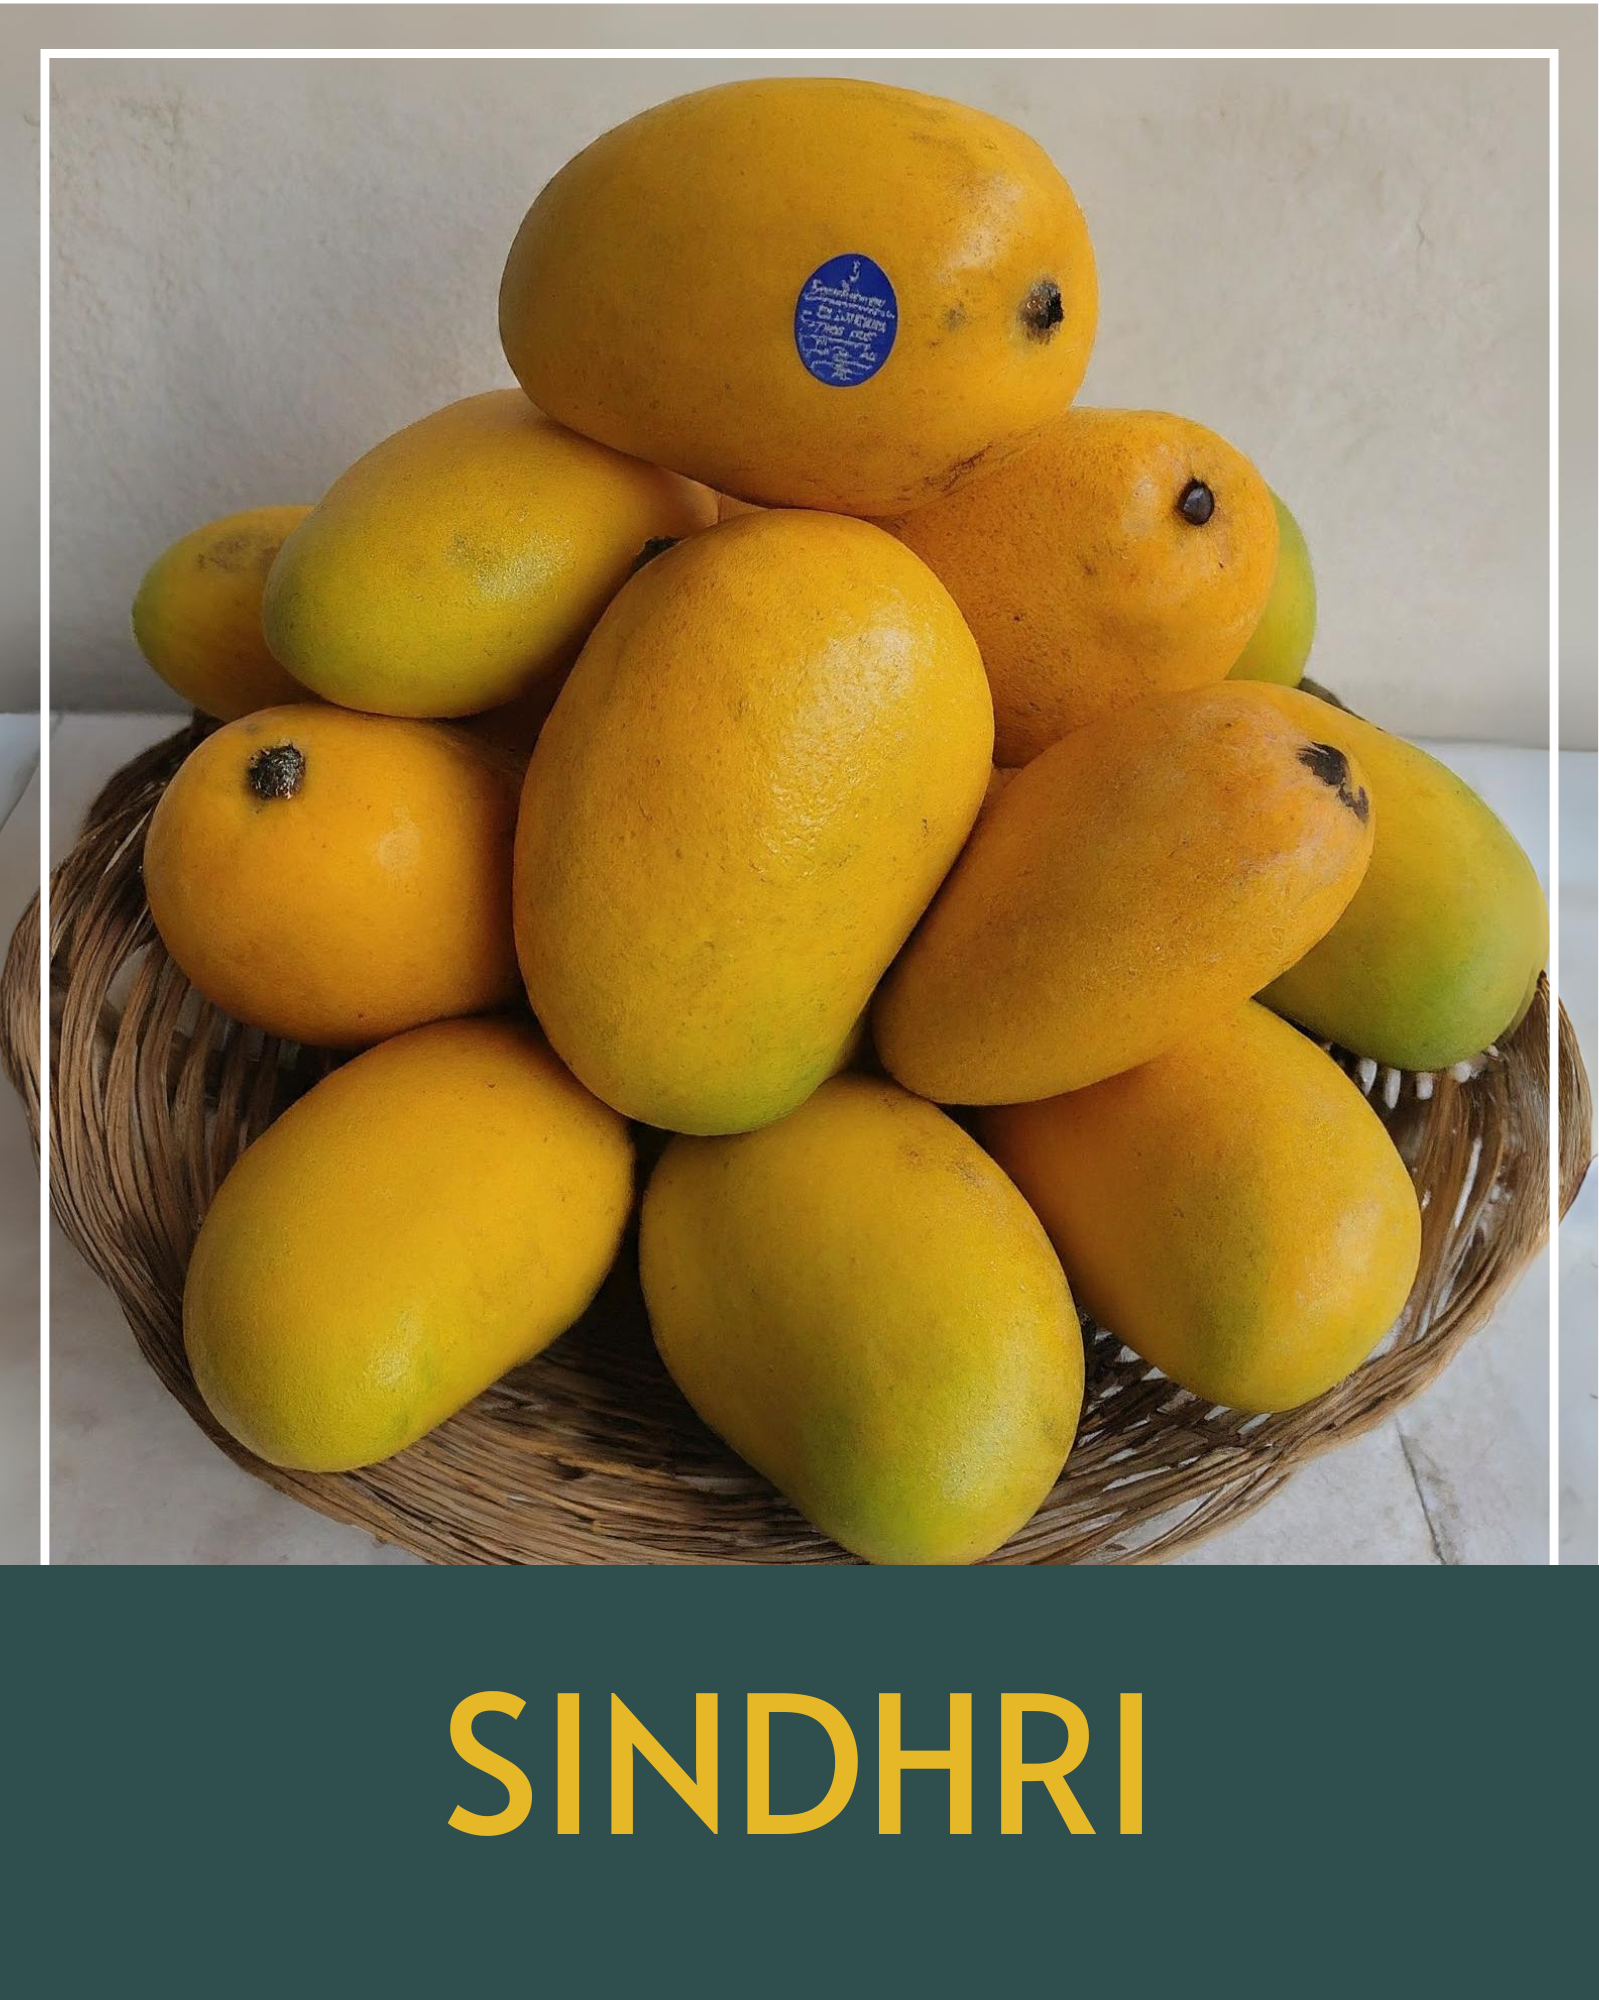 Sweet and creamy Sindhri mangoes, a premium Pakistani variety available in Canada.